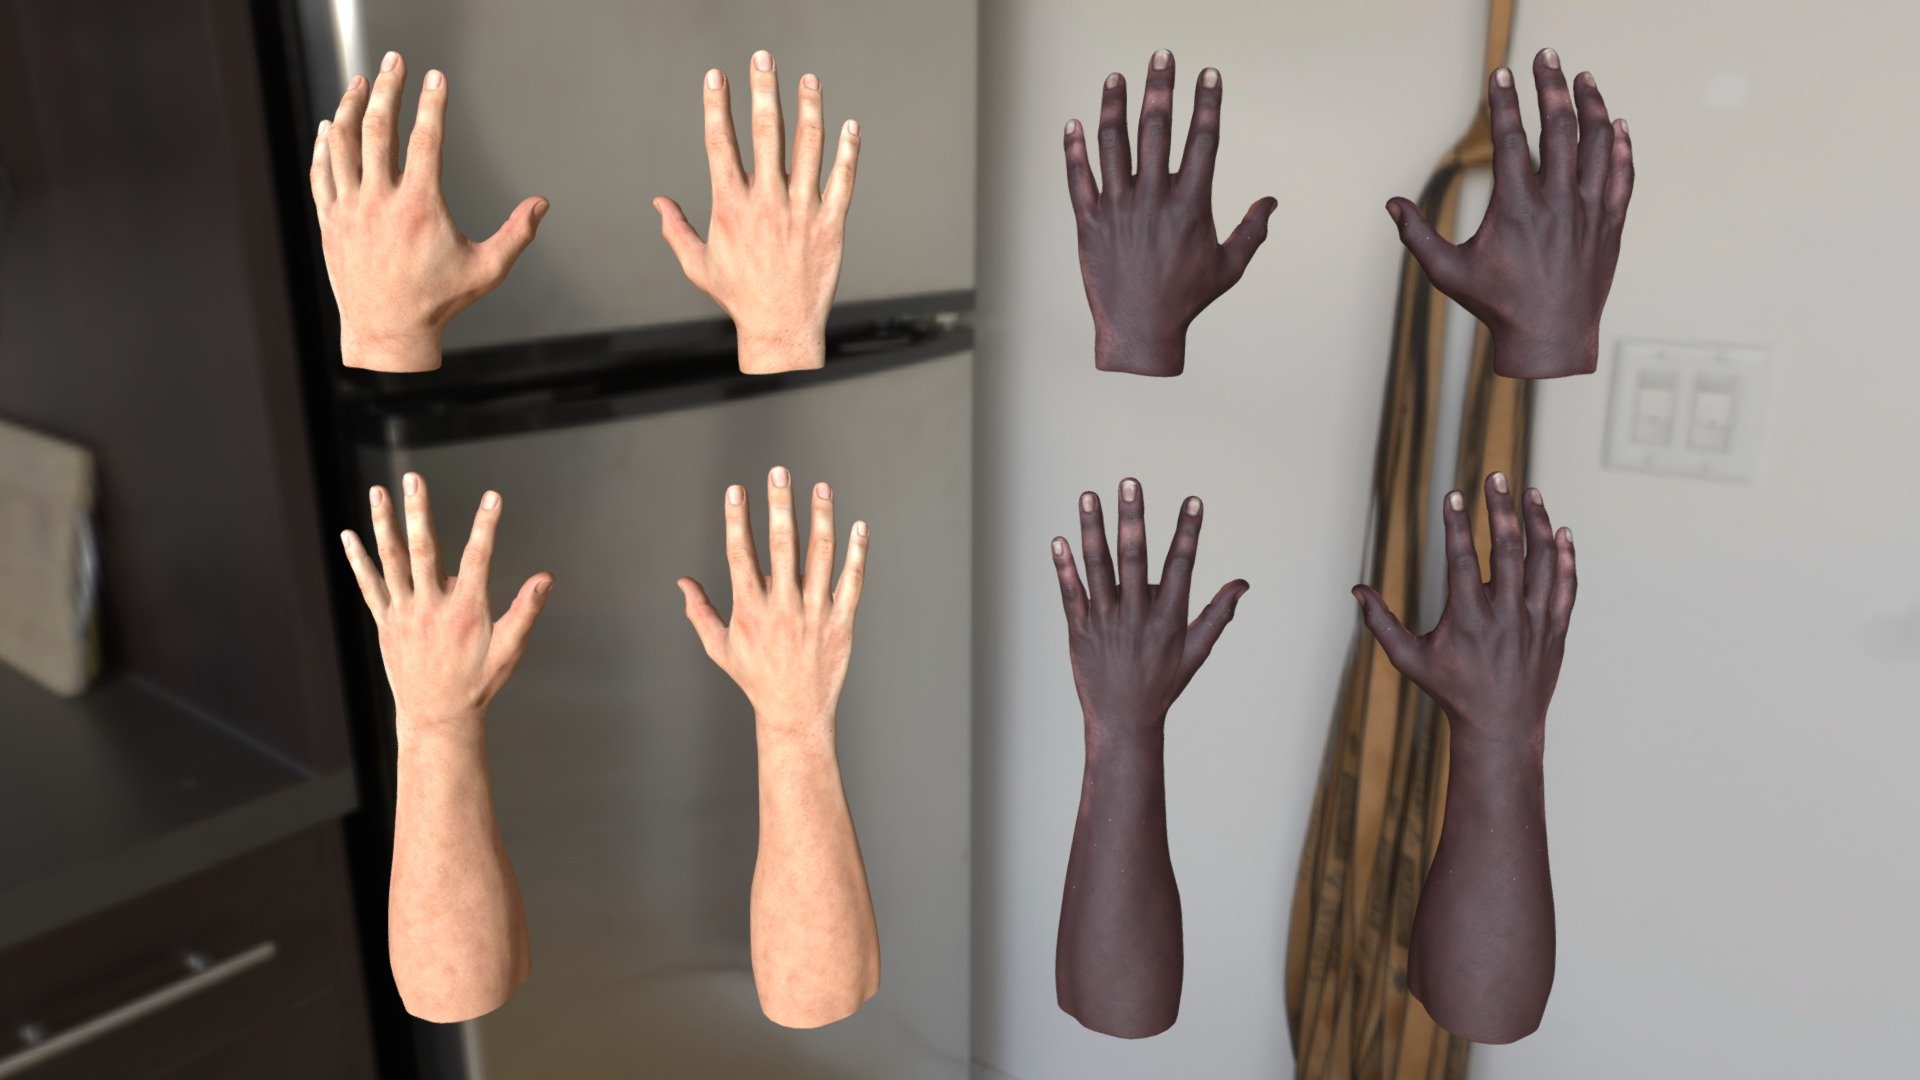 Asset store page:
Link under preview video description

Preview video:
https://youtu.be/JPet-FuN8jU

This asset contains four types of realistic human hands pairs. 
All of them are ready to play with your Leap Motion device 3d model